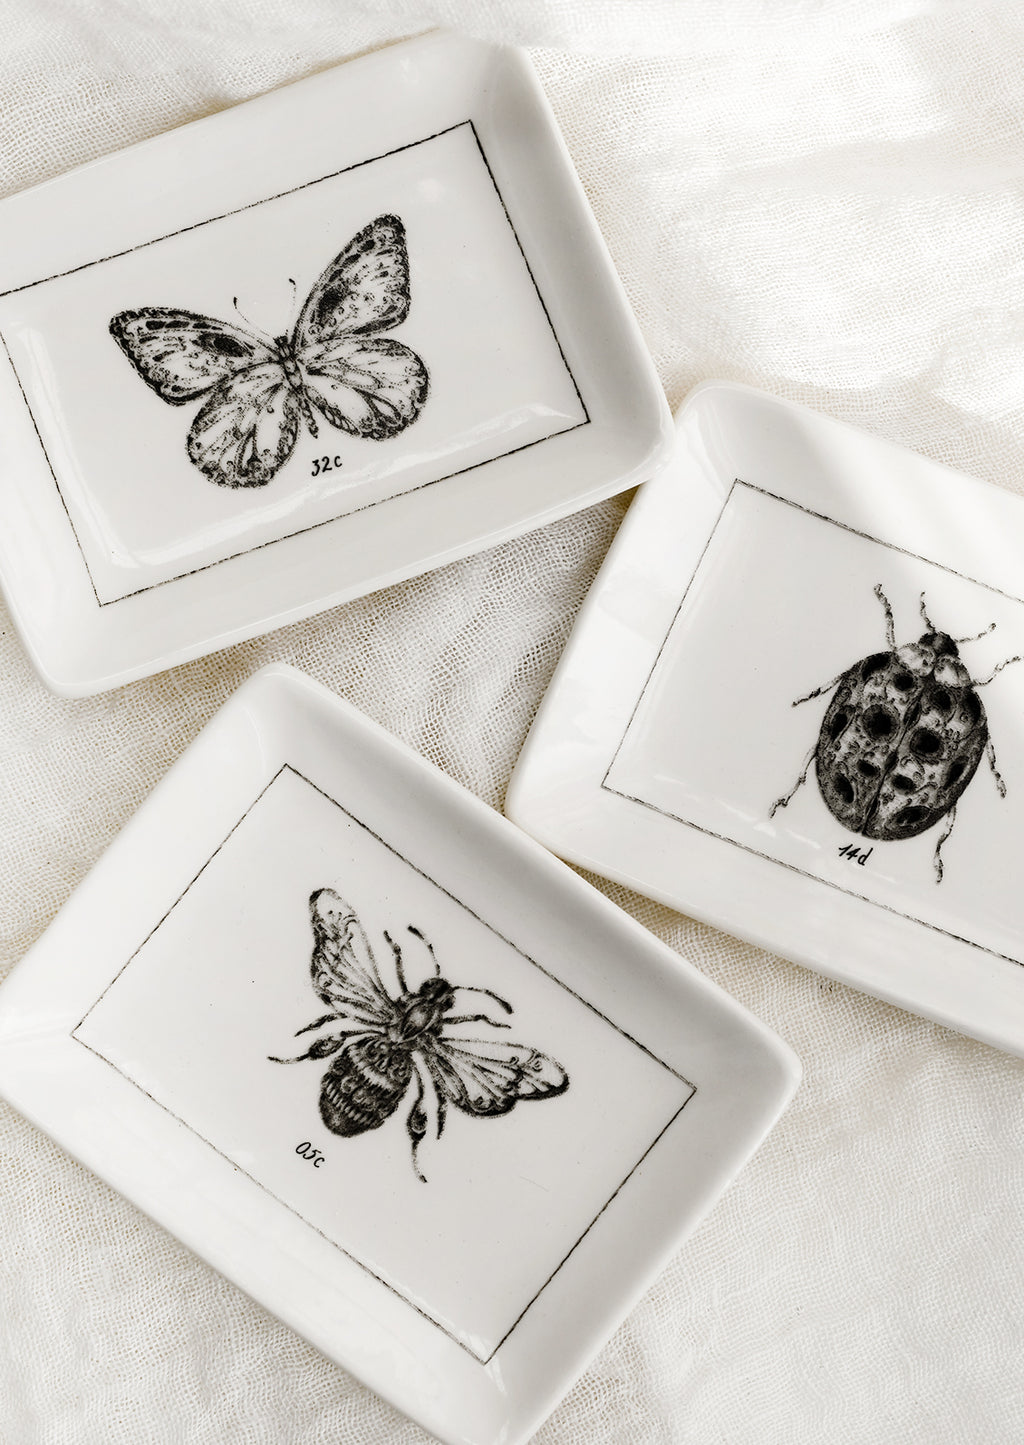 2: Black and white trinket dishes with assorted insects.